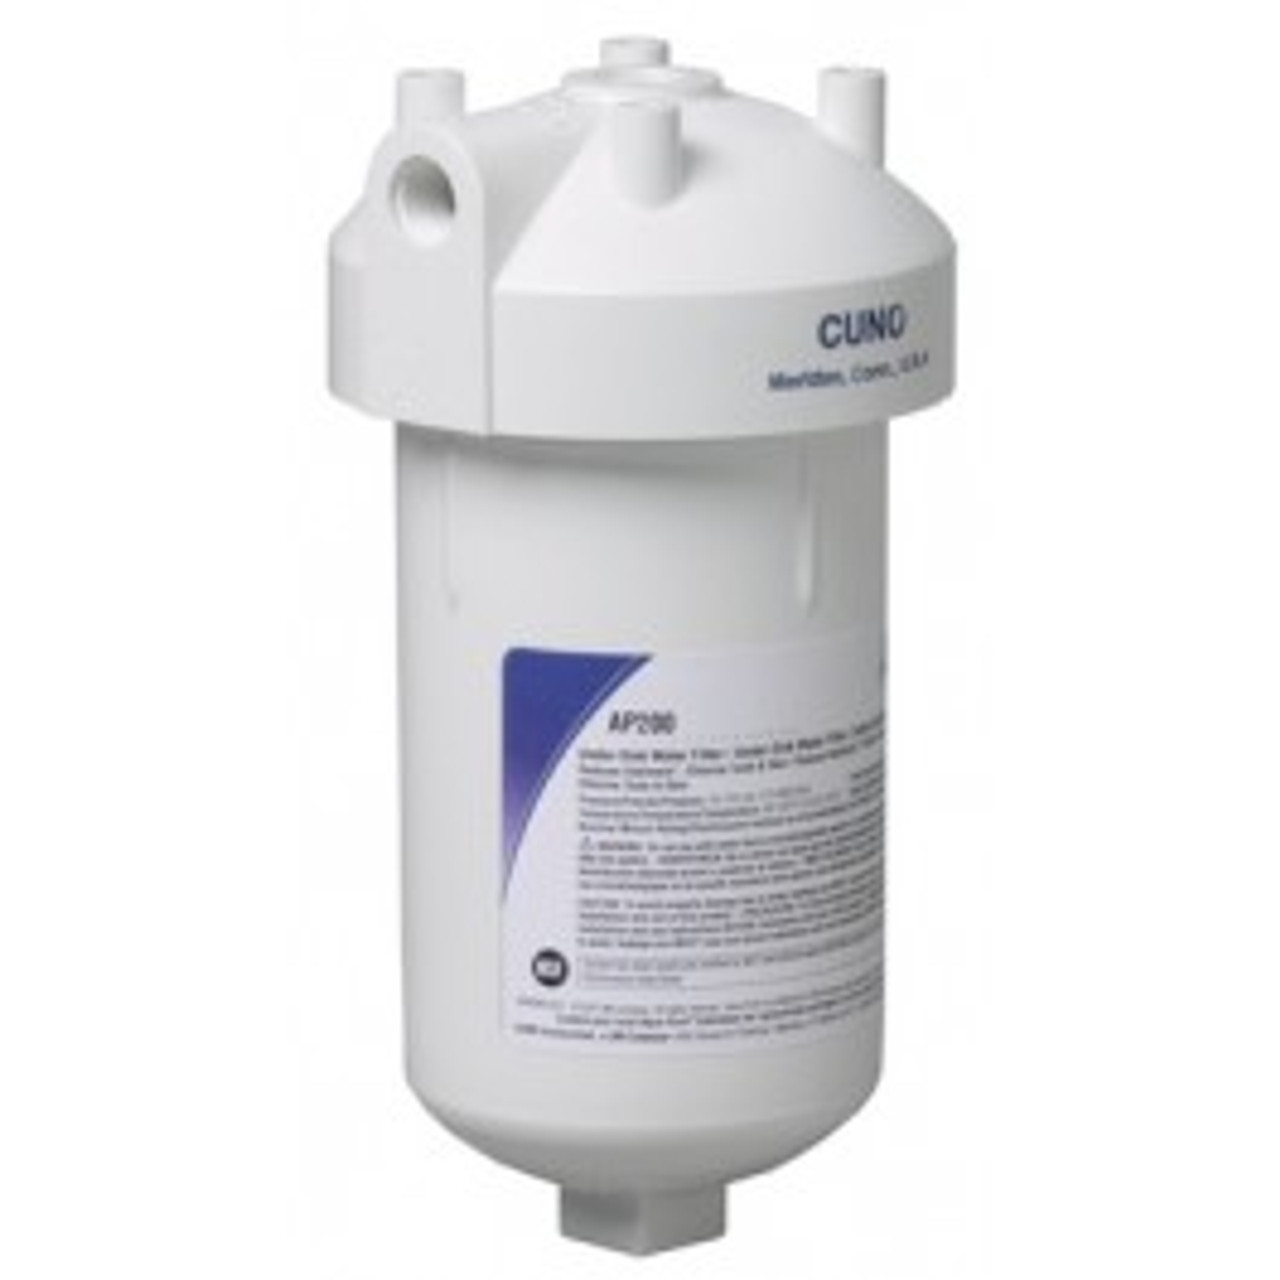 55289-01 $289 w/ COUPONS 3M Cuno Aqua Pure - AP200 Water Filtration System  # 5528901